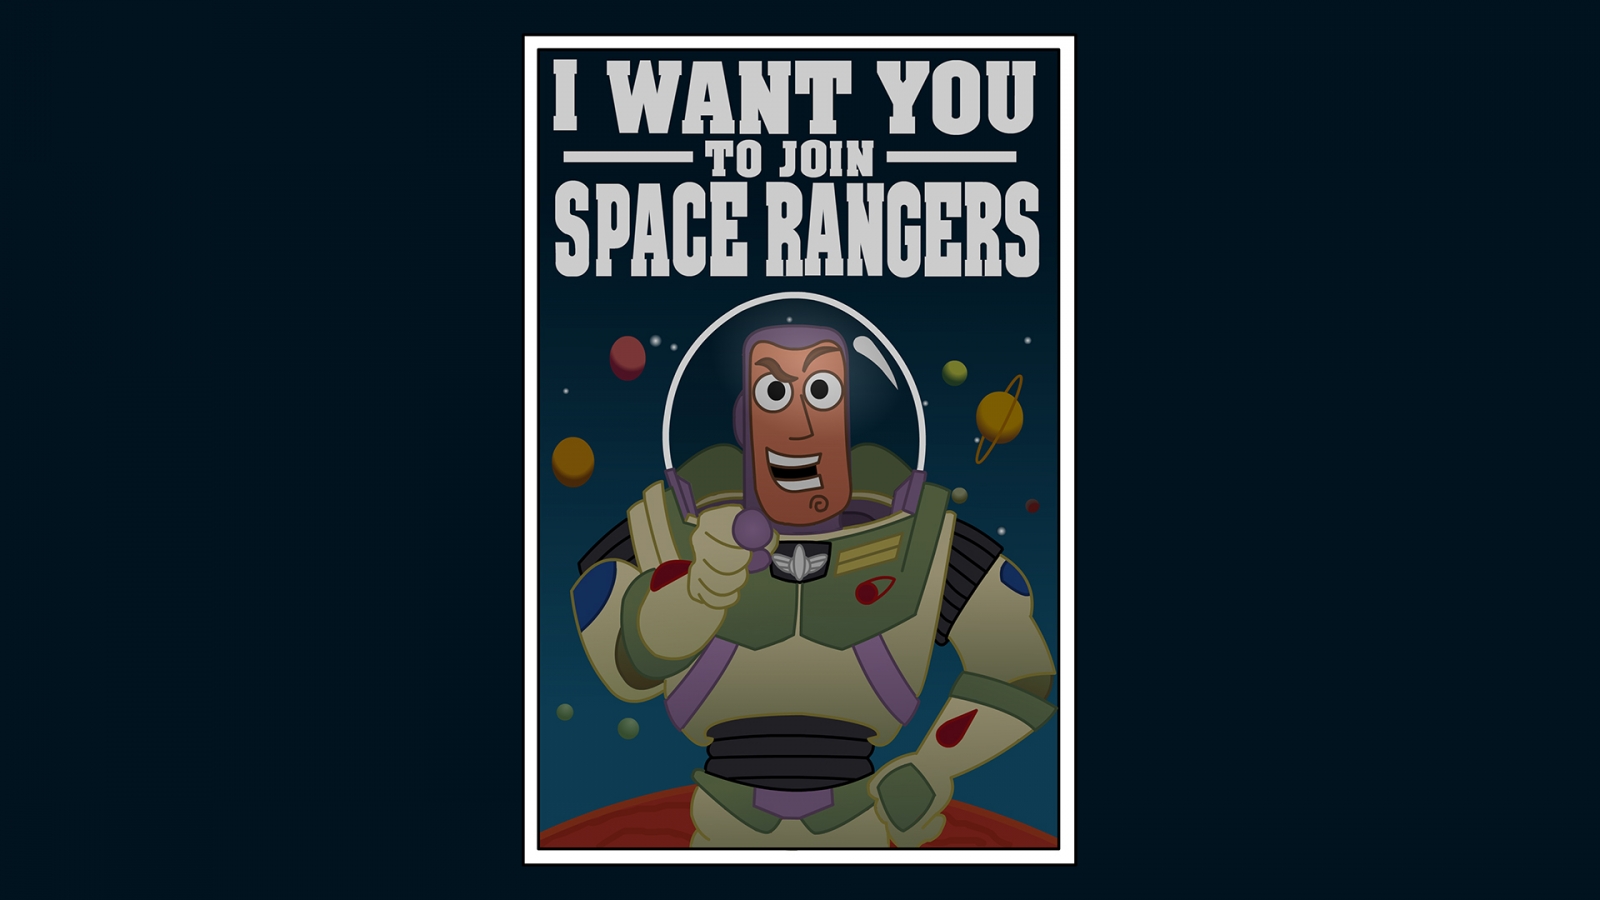 Free download Toy Story Buzz Lightyear Space Rangers Poster